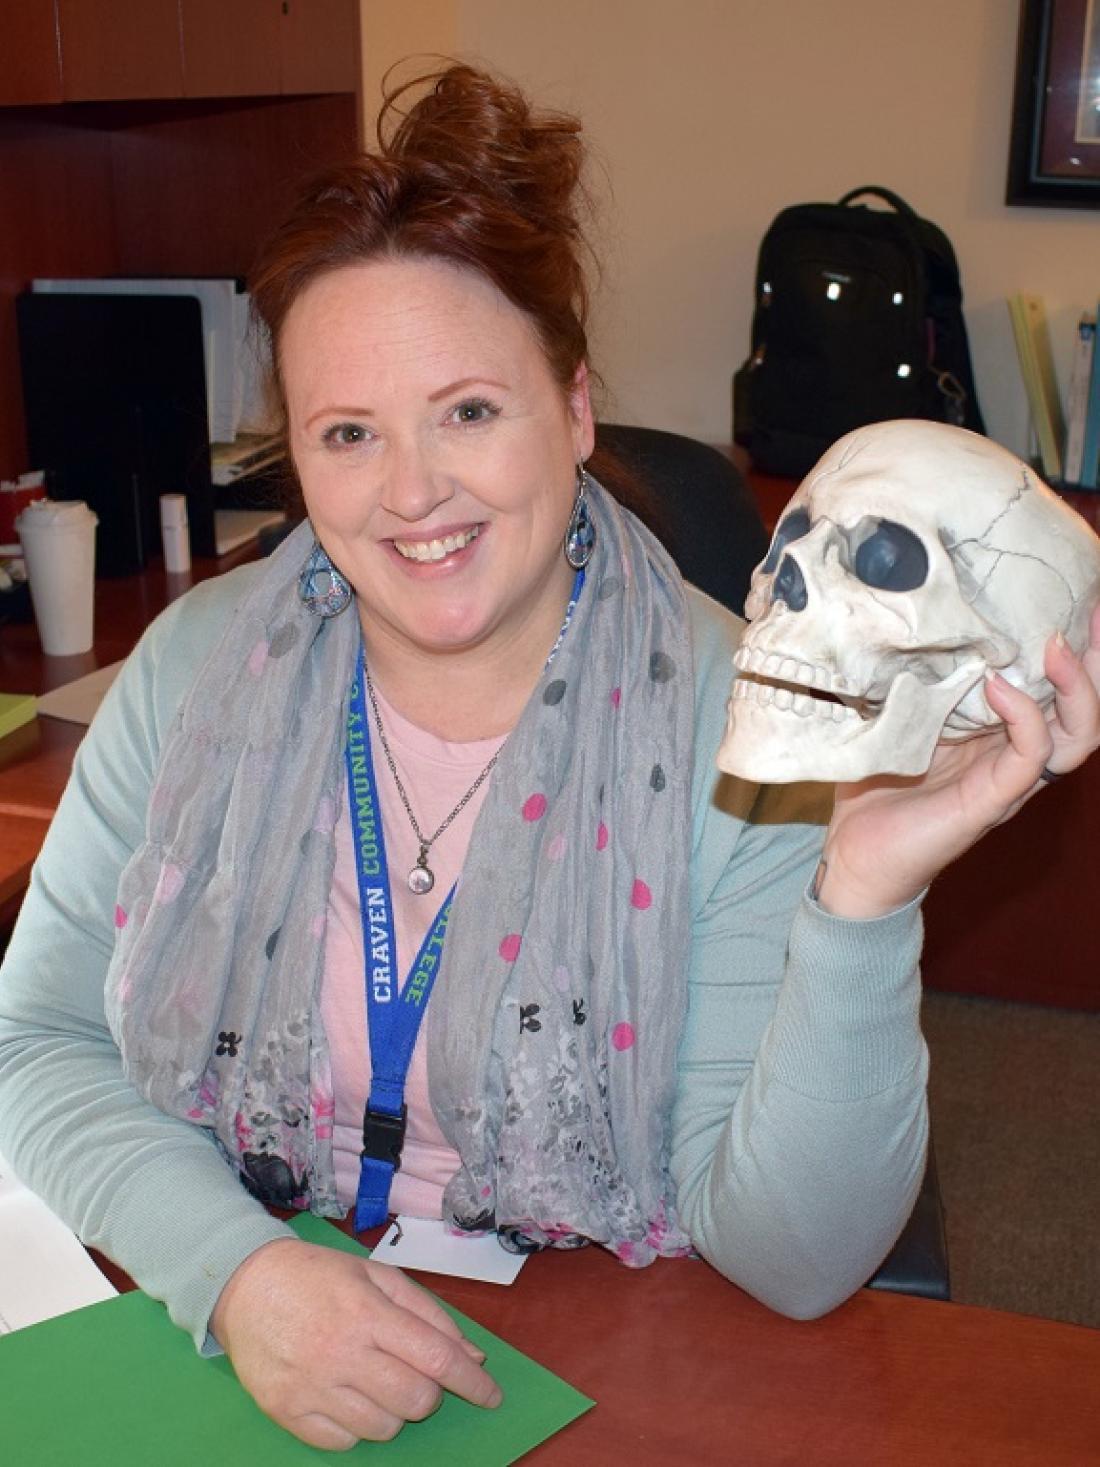 Craven CC Criminal Justice program instructor LauraAnn Avery, holding class prop “Fred the Head,” recently became the program coordinator and is helping retain its award-winning status.